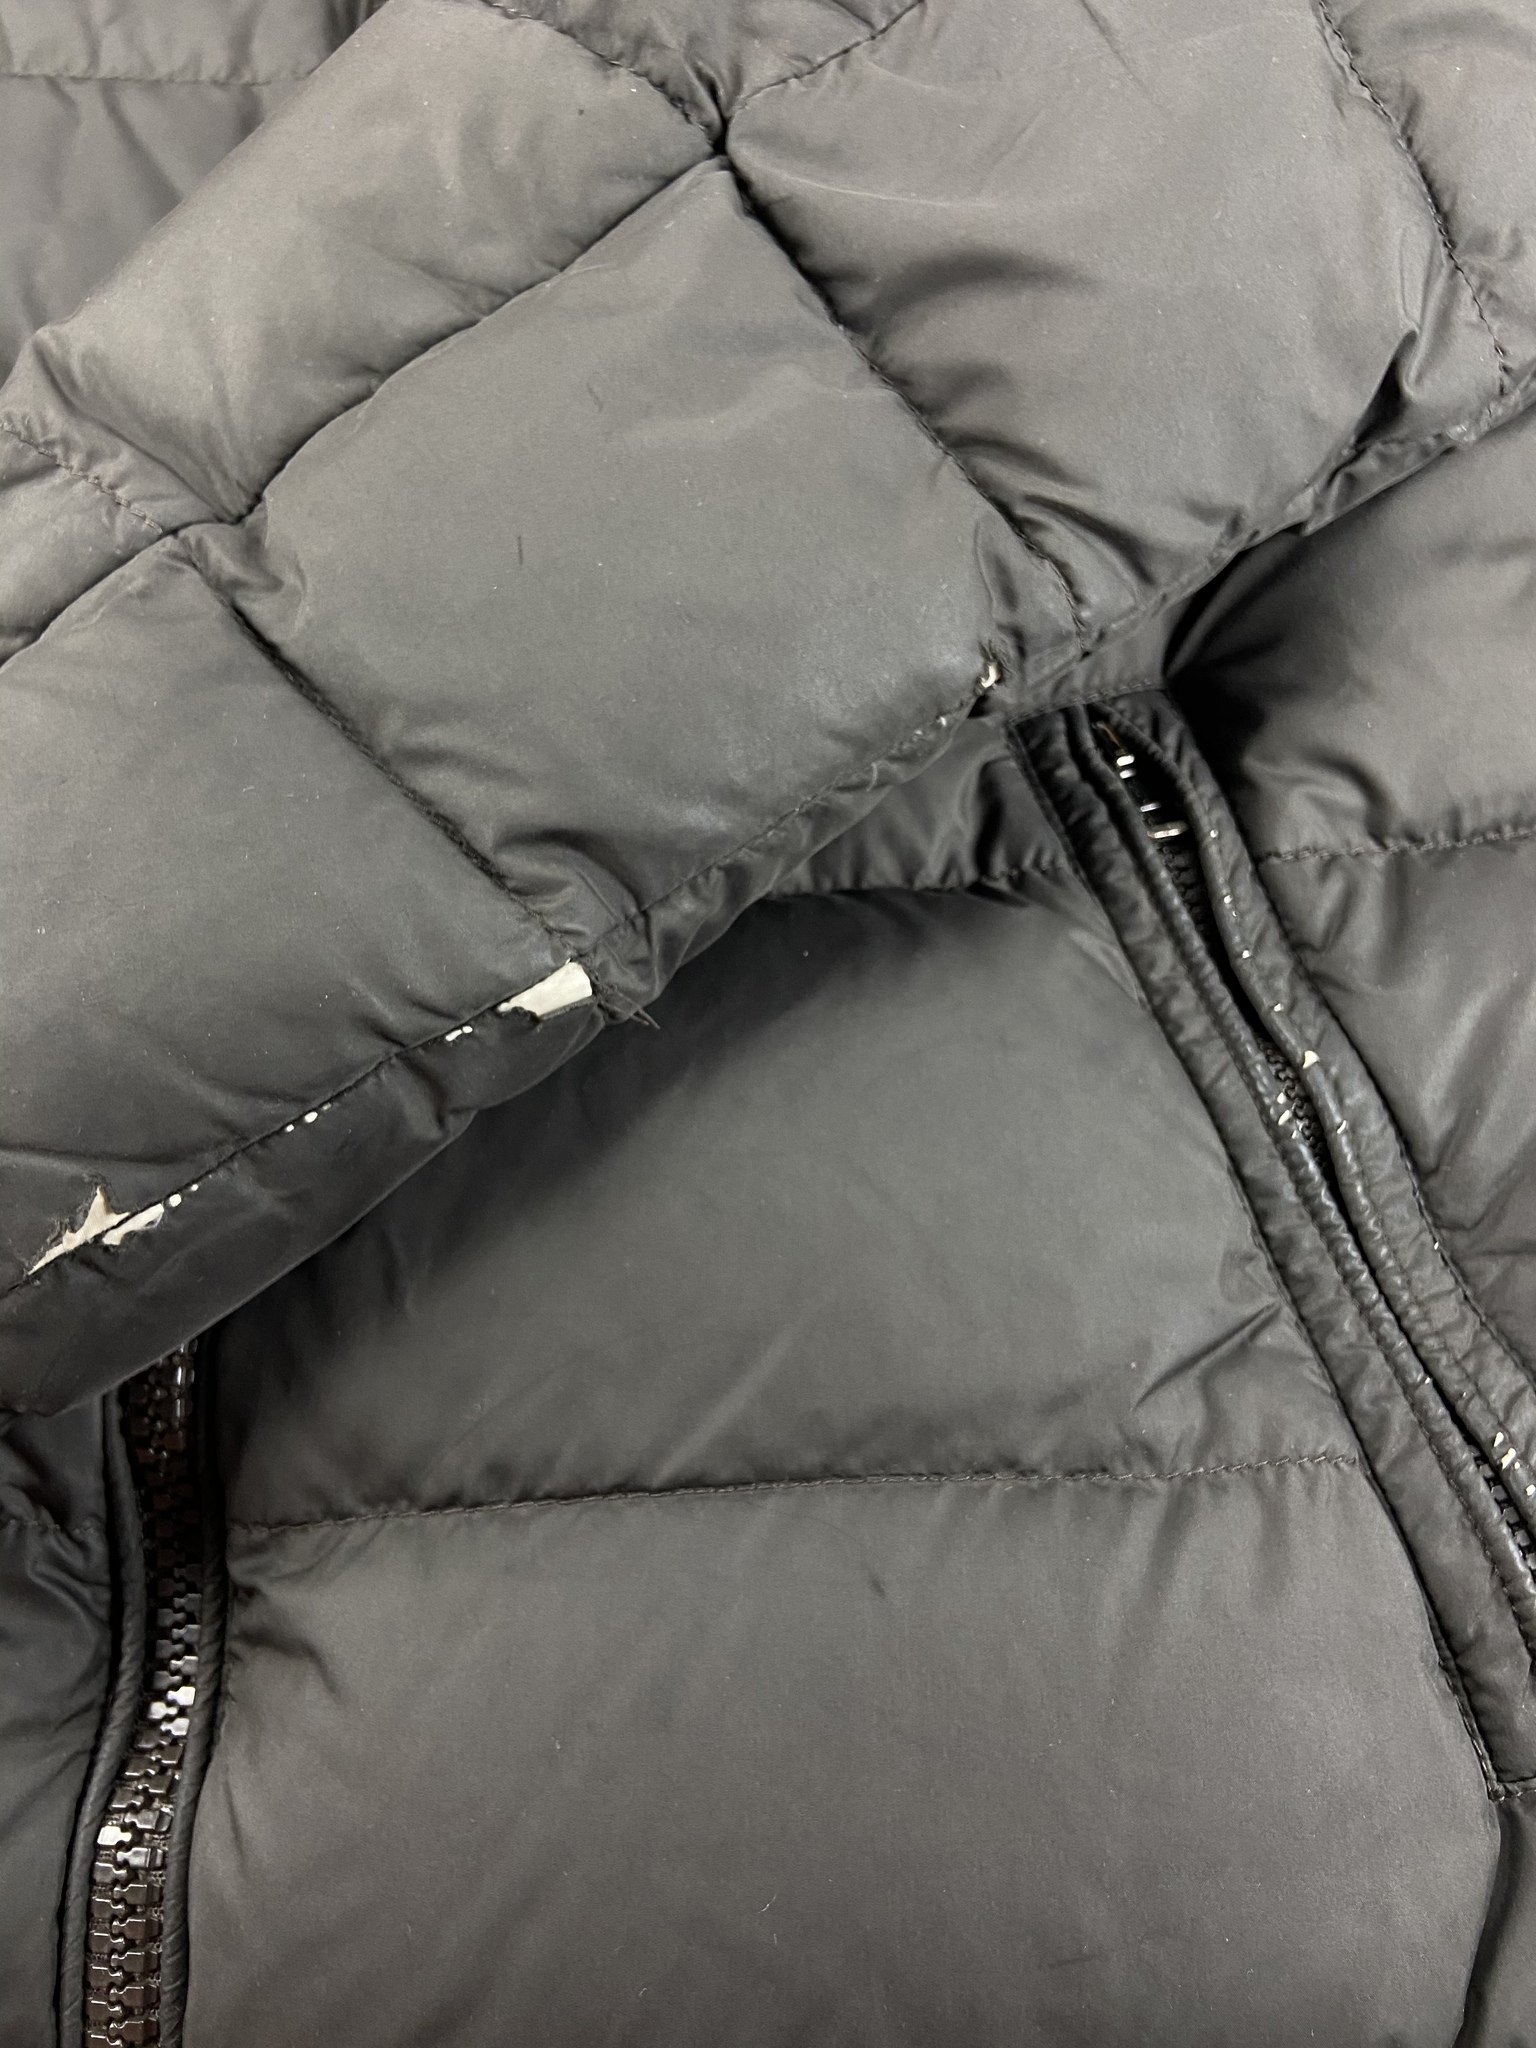 Moncler Chevalier Down Jacket